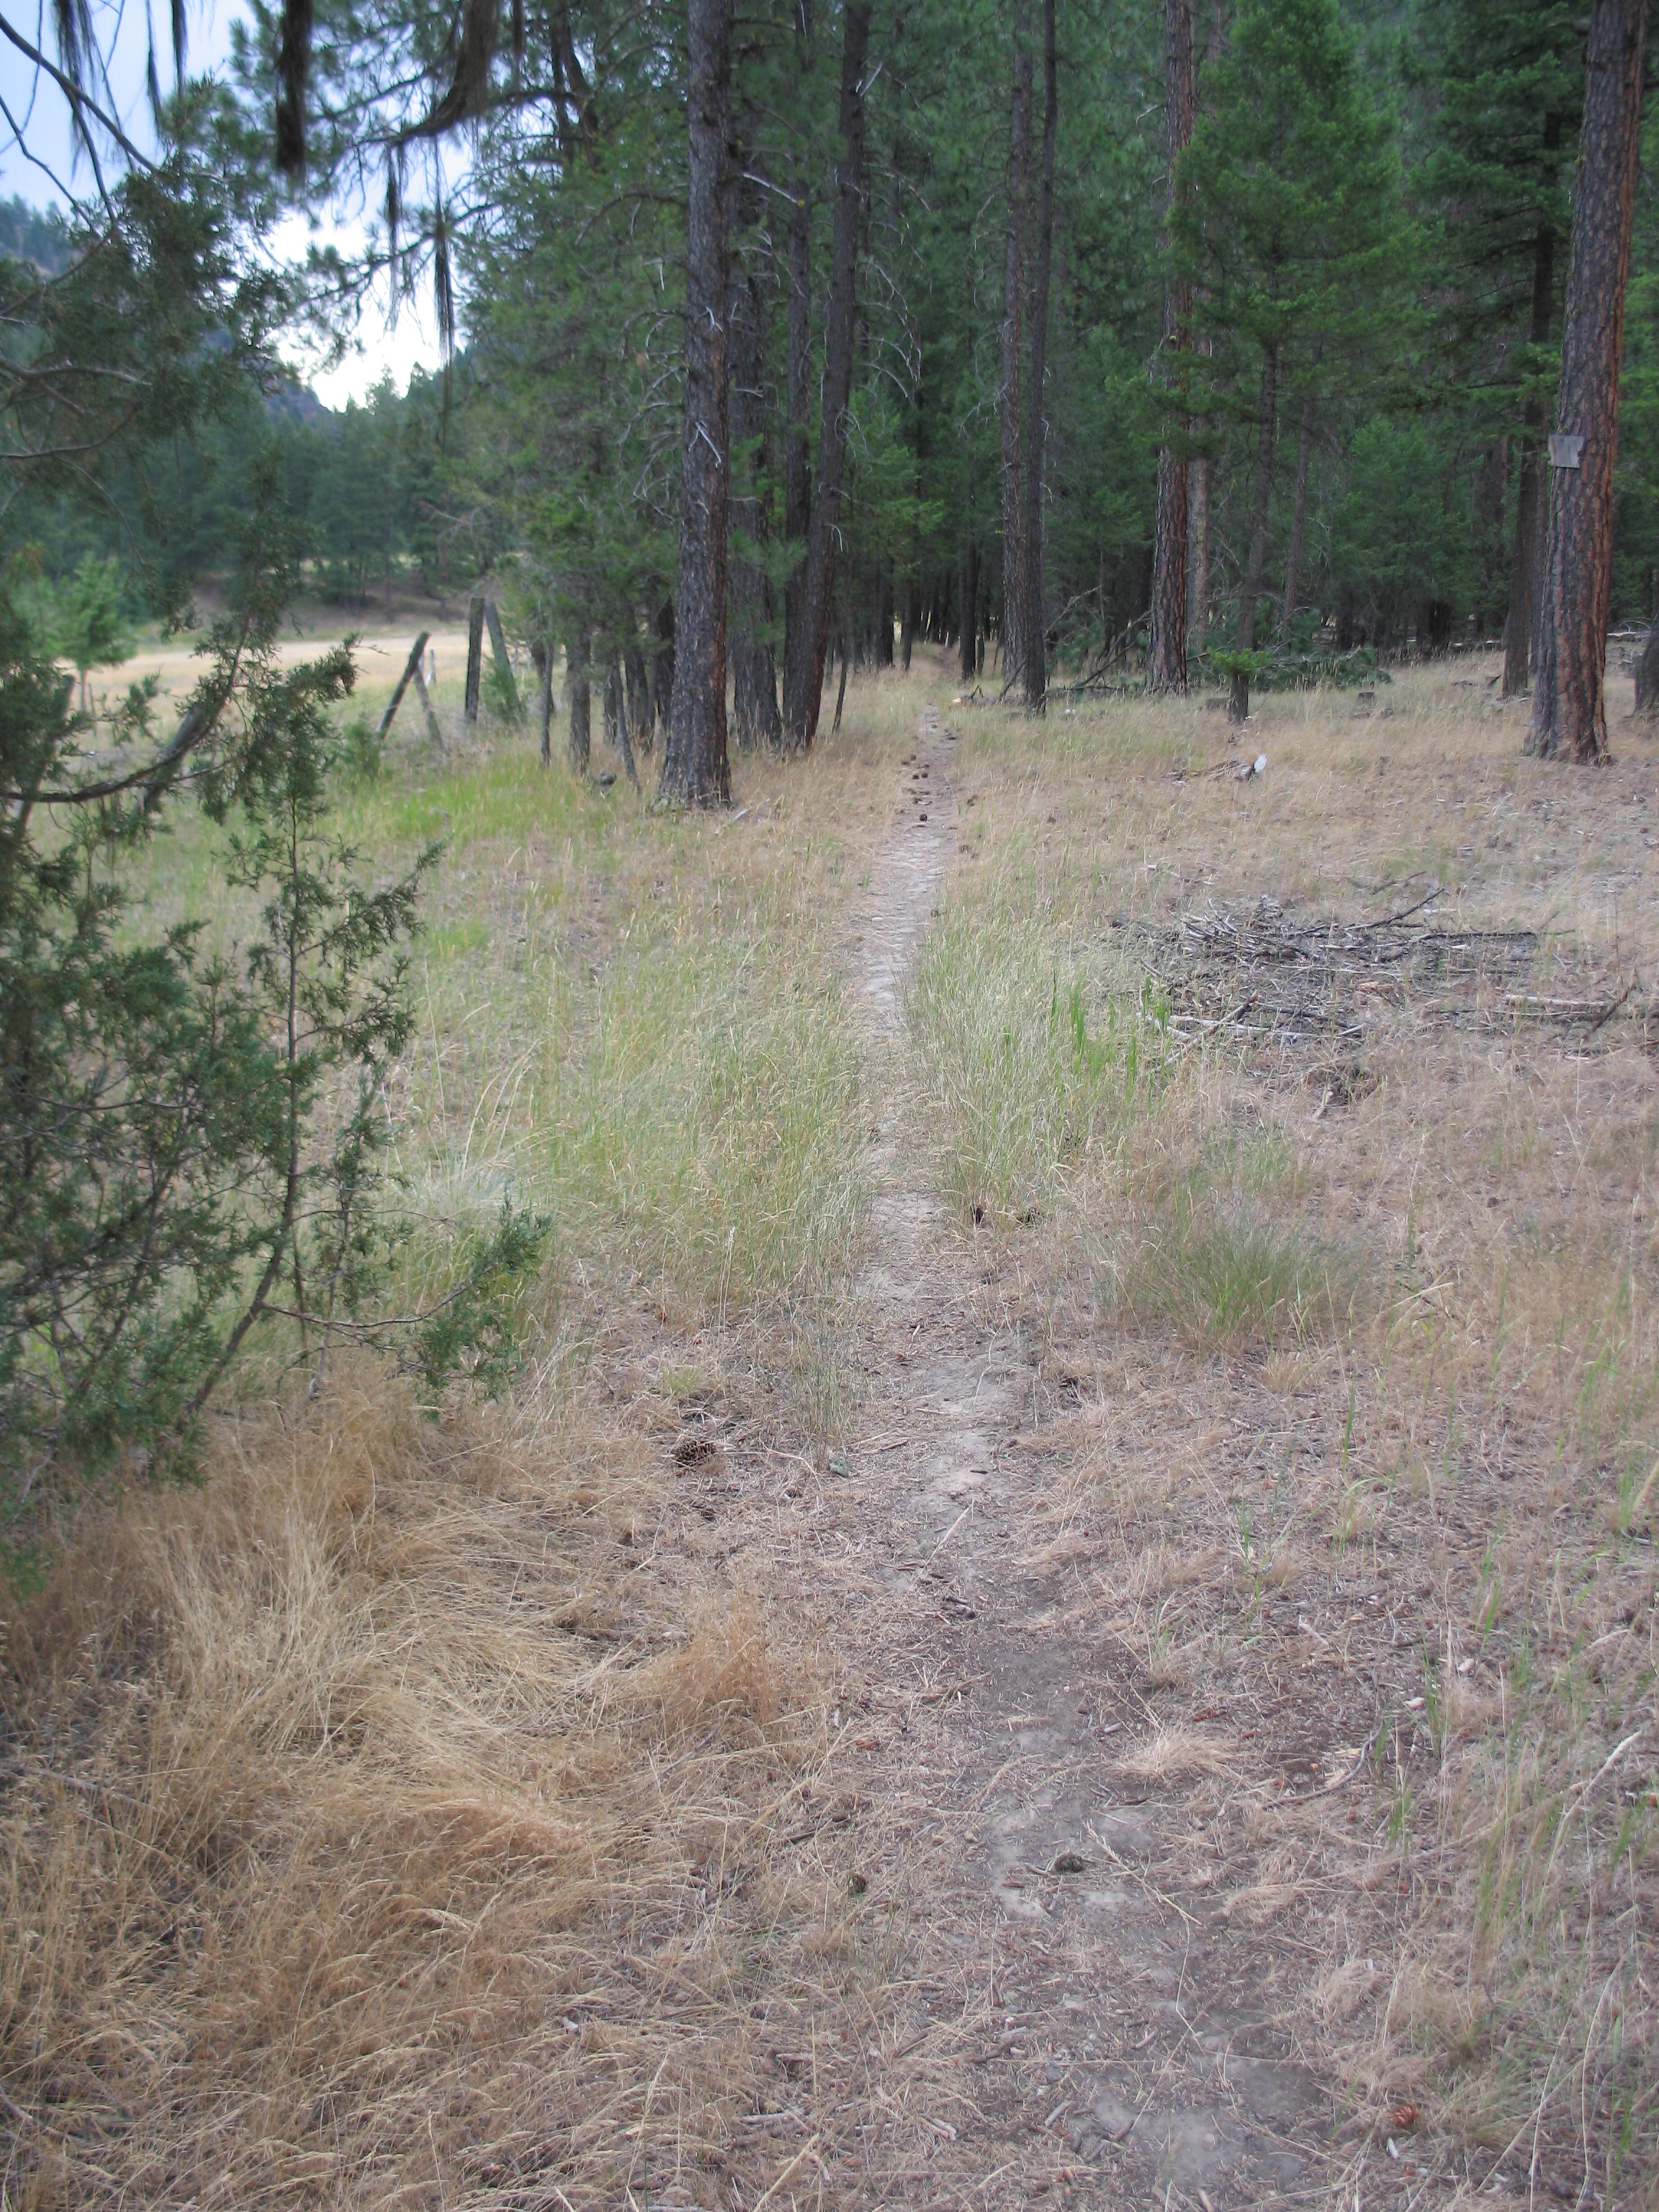 picture showing Picture of the trail near the trailhead showing a sandy narrow (12-inch) path through trees.